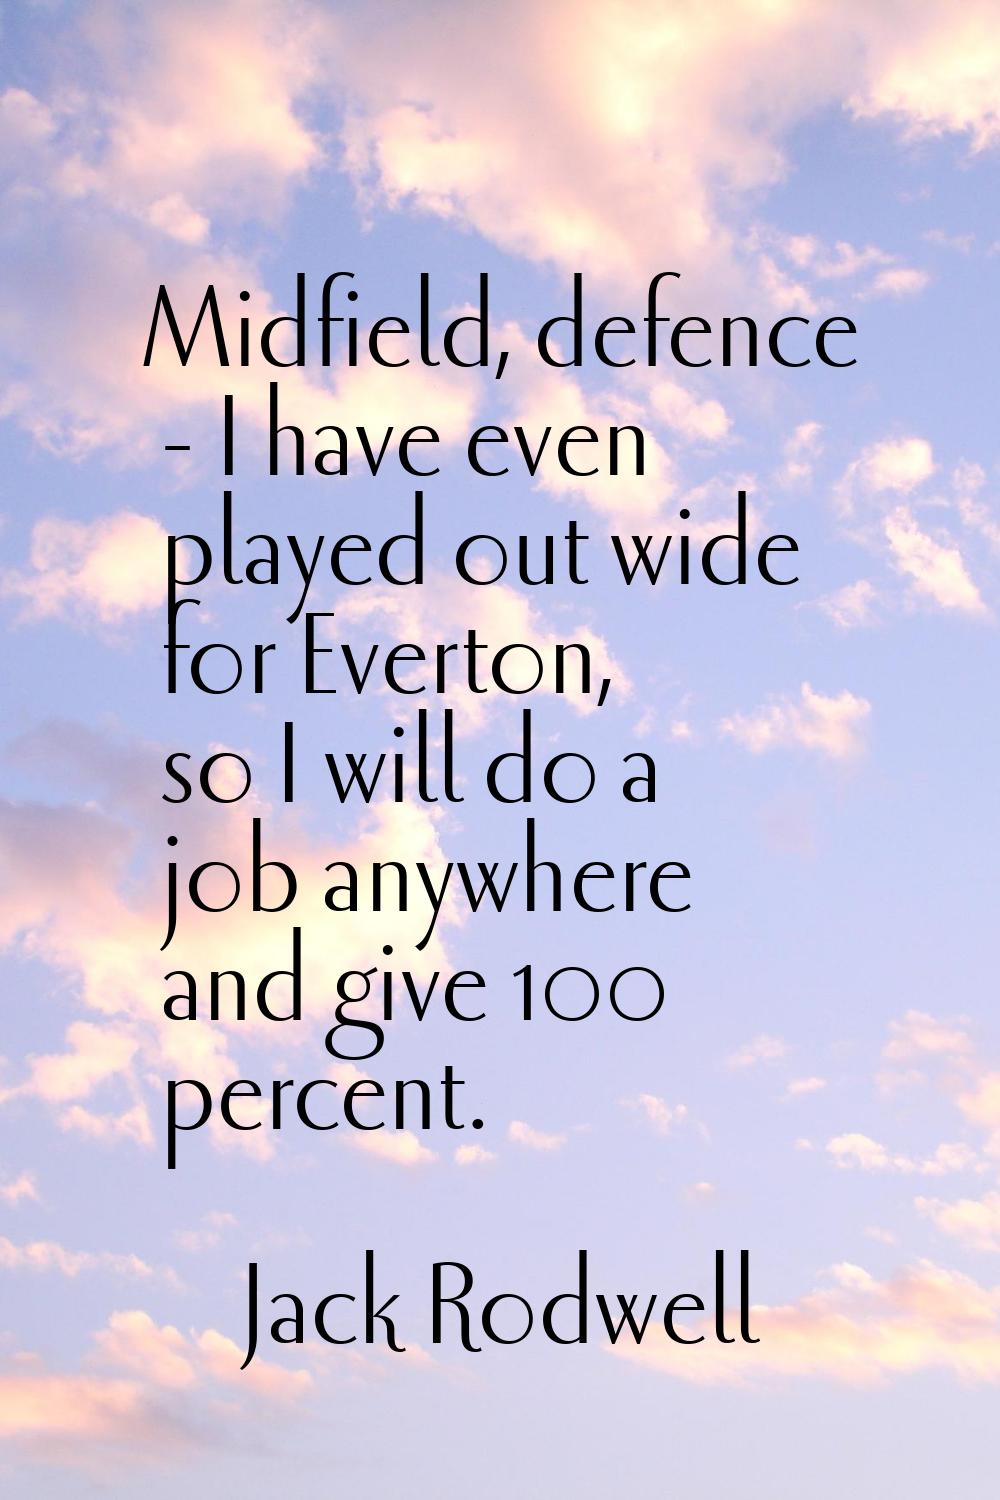 Midfield, defence - I have even played out wide for Everton, so I will do a job anywhere and give 1